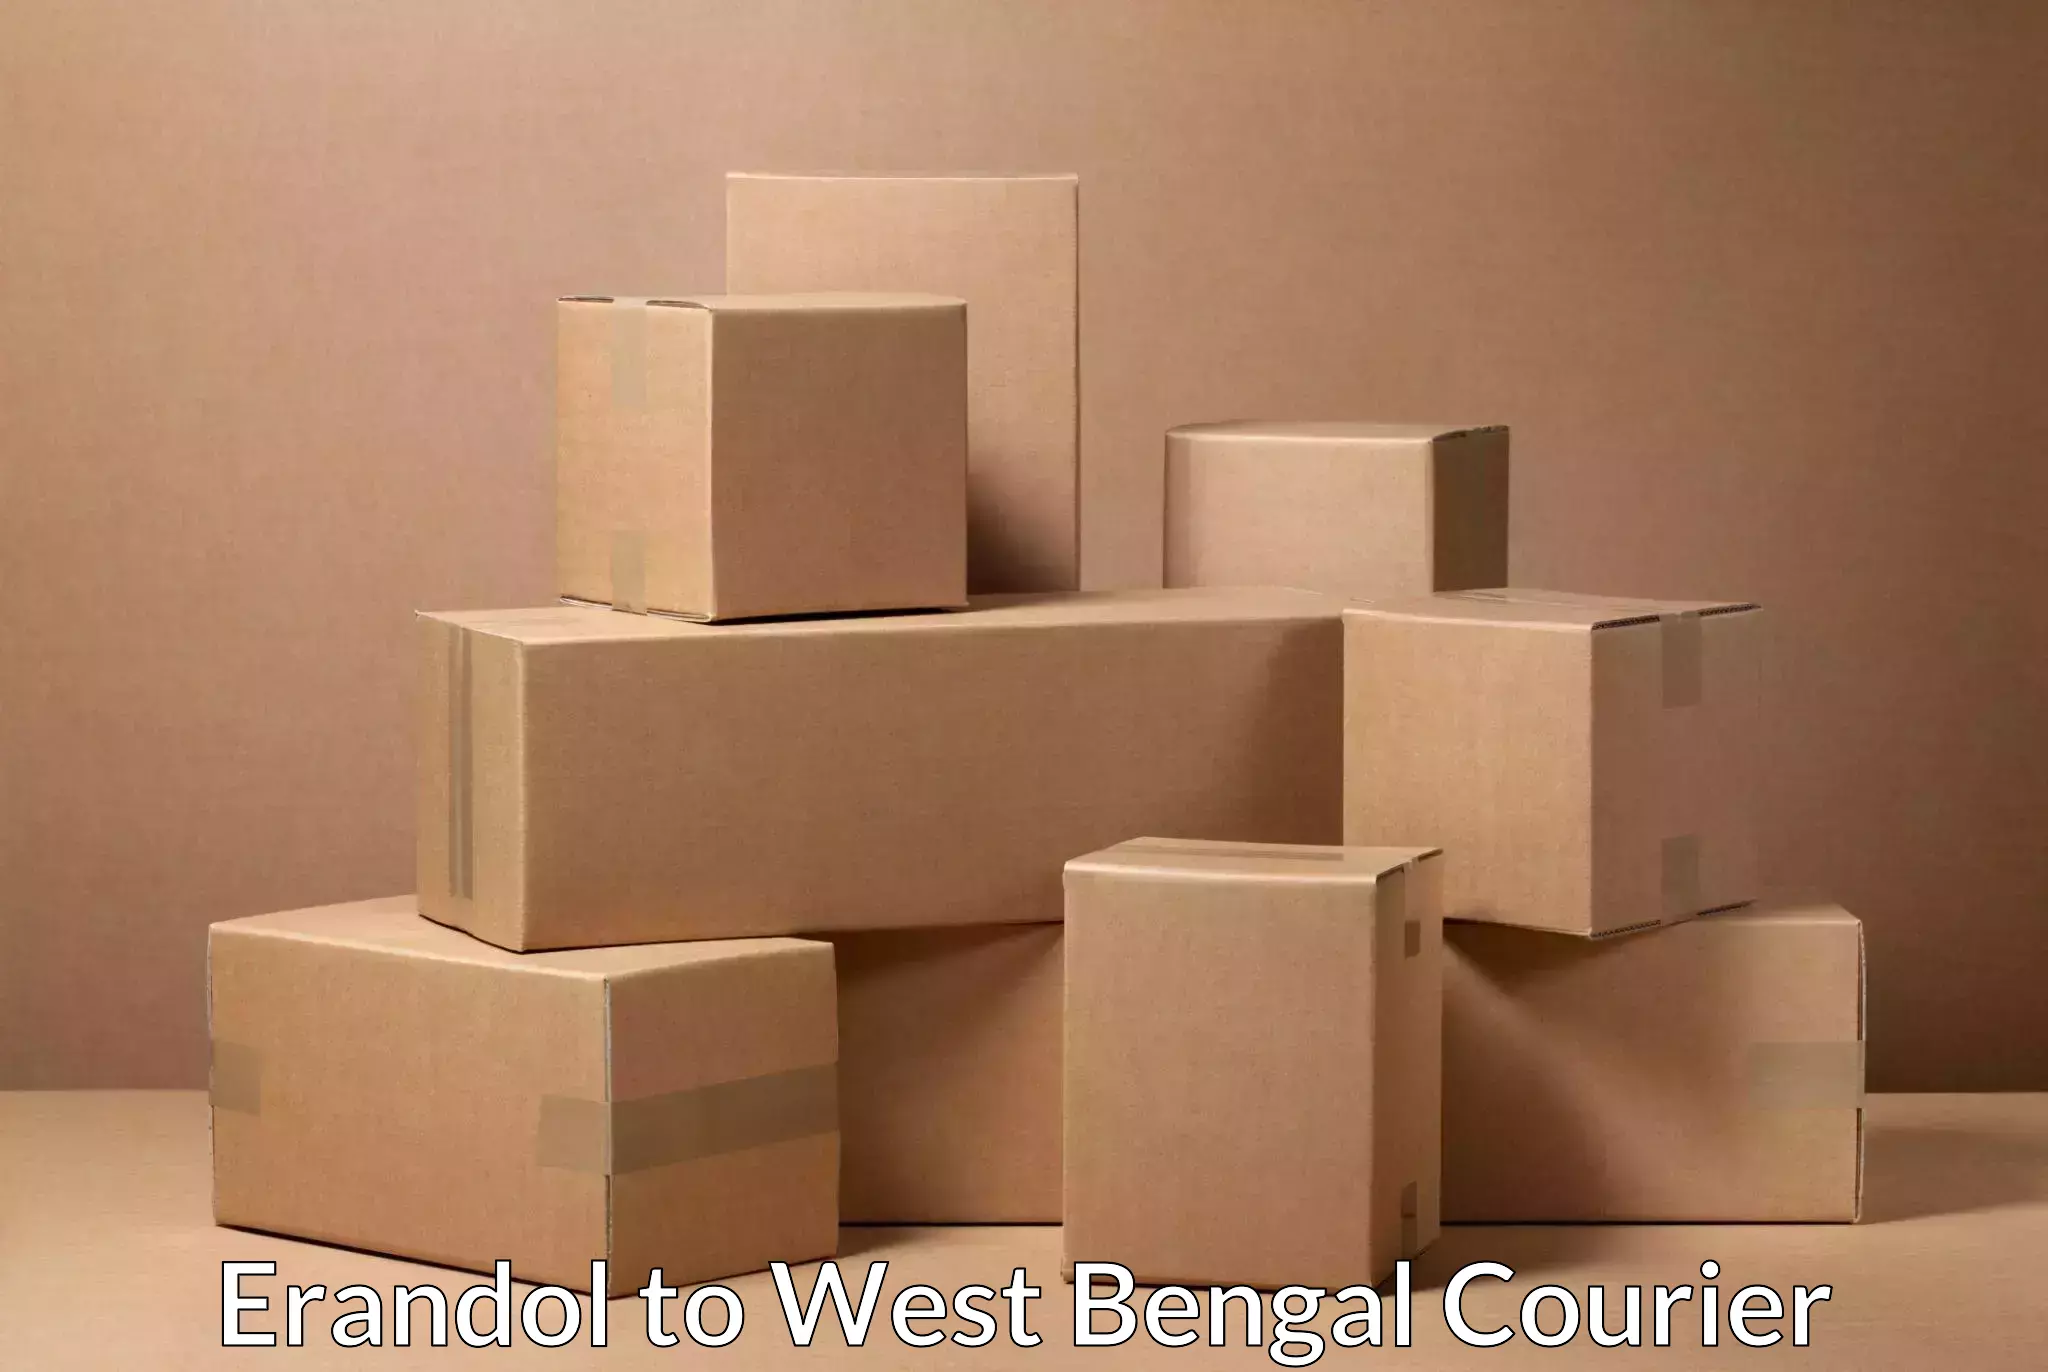 On-call courier service Erandol to West Bengal